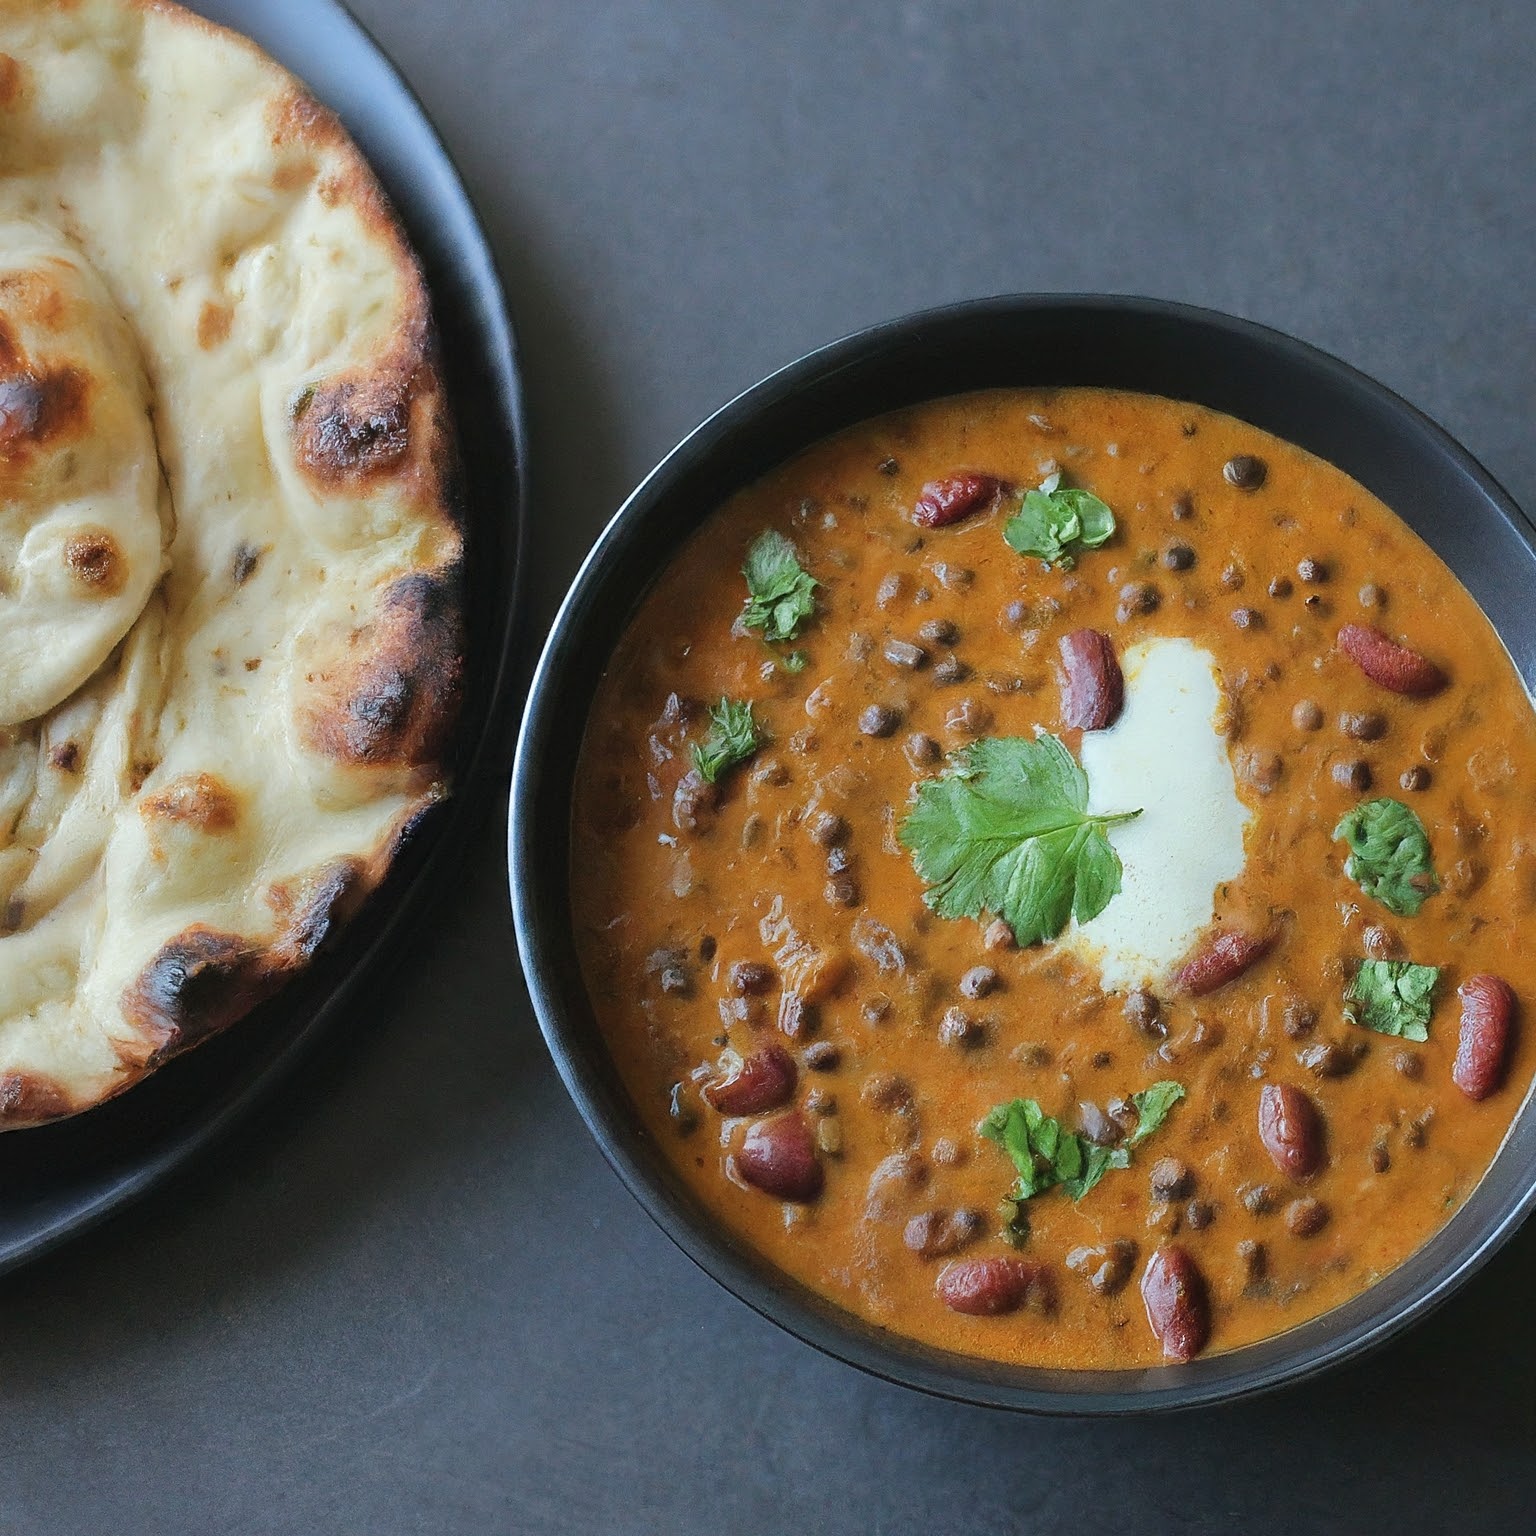 A steaming bowl of Dal Makhani, a creamy Indian lentil curry with black urad dal, red kidney beans, and fresh cilantro.